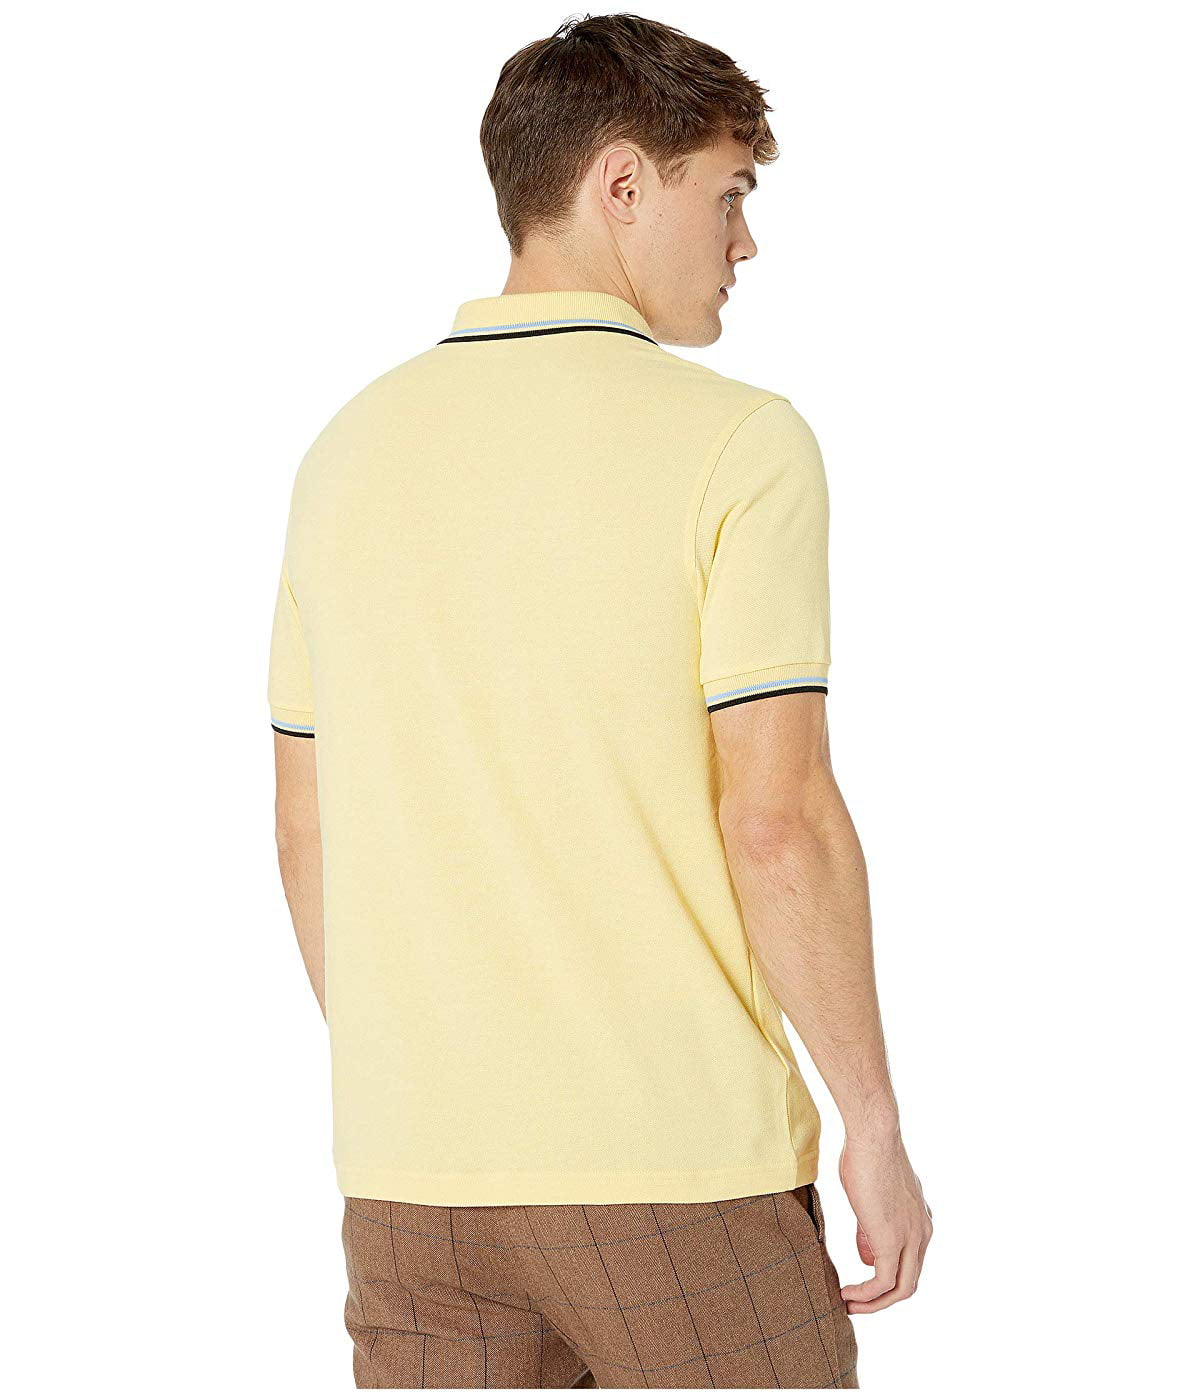 Notebook Soms Station Fred Perry Twin Tipped Shirt Soft Yellow/Summer Blue/Black - Walmart.com